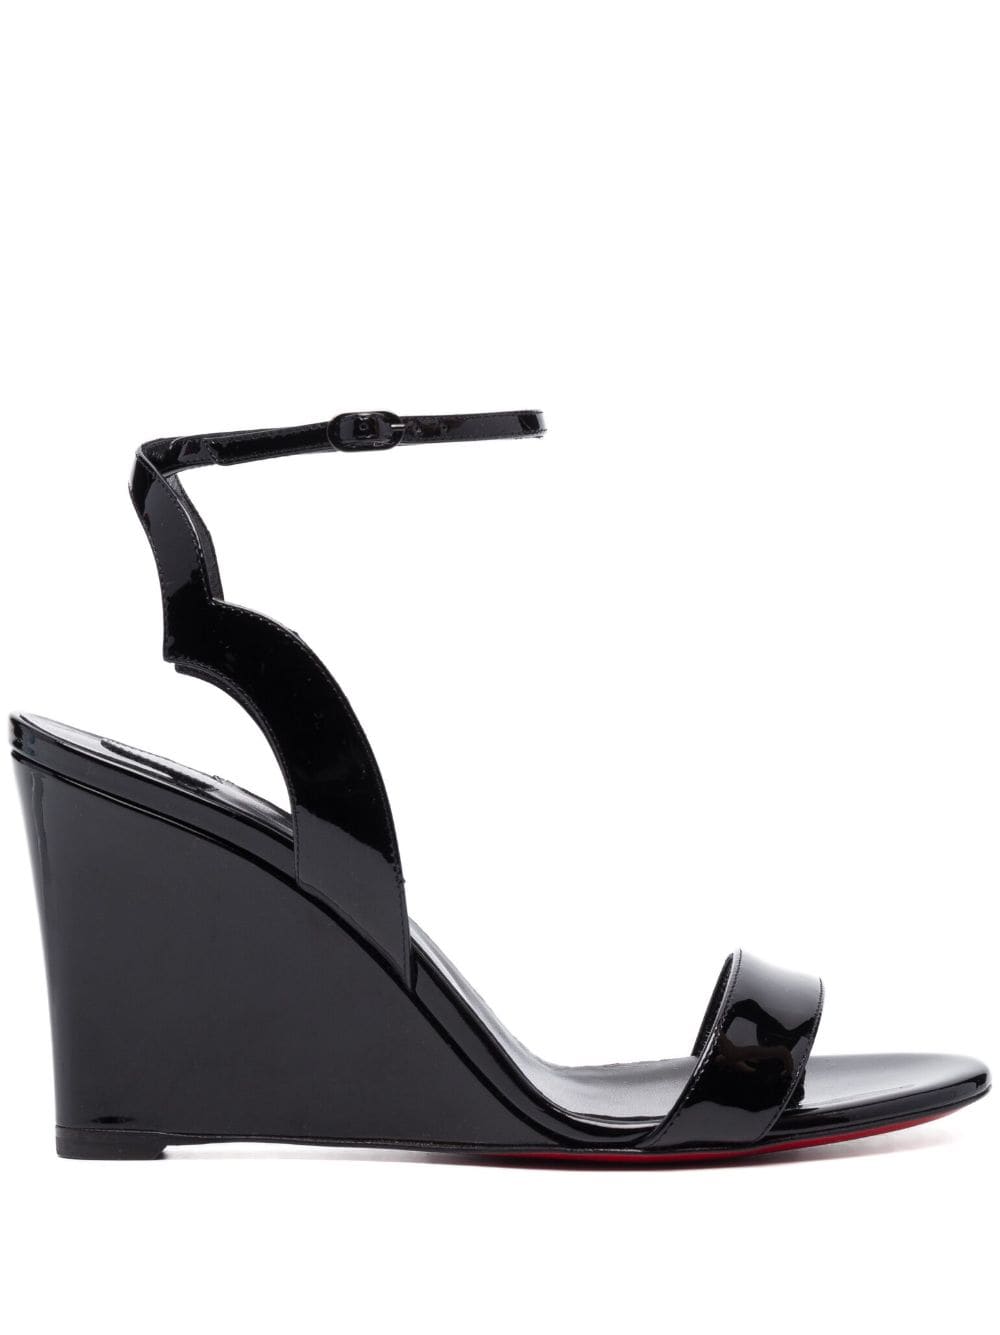 Image 1 of Christian Louboutin Zeppa Chick 85mm wedge sandals